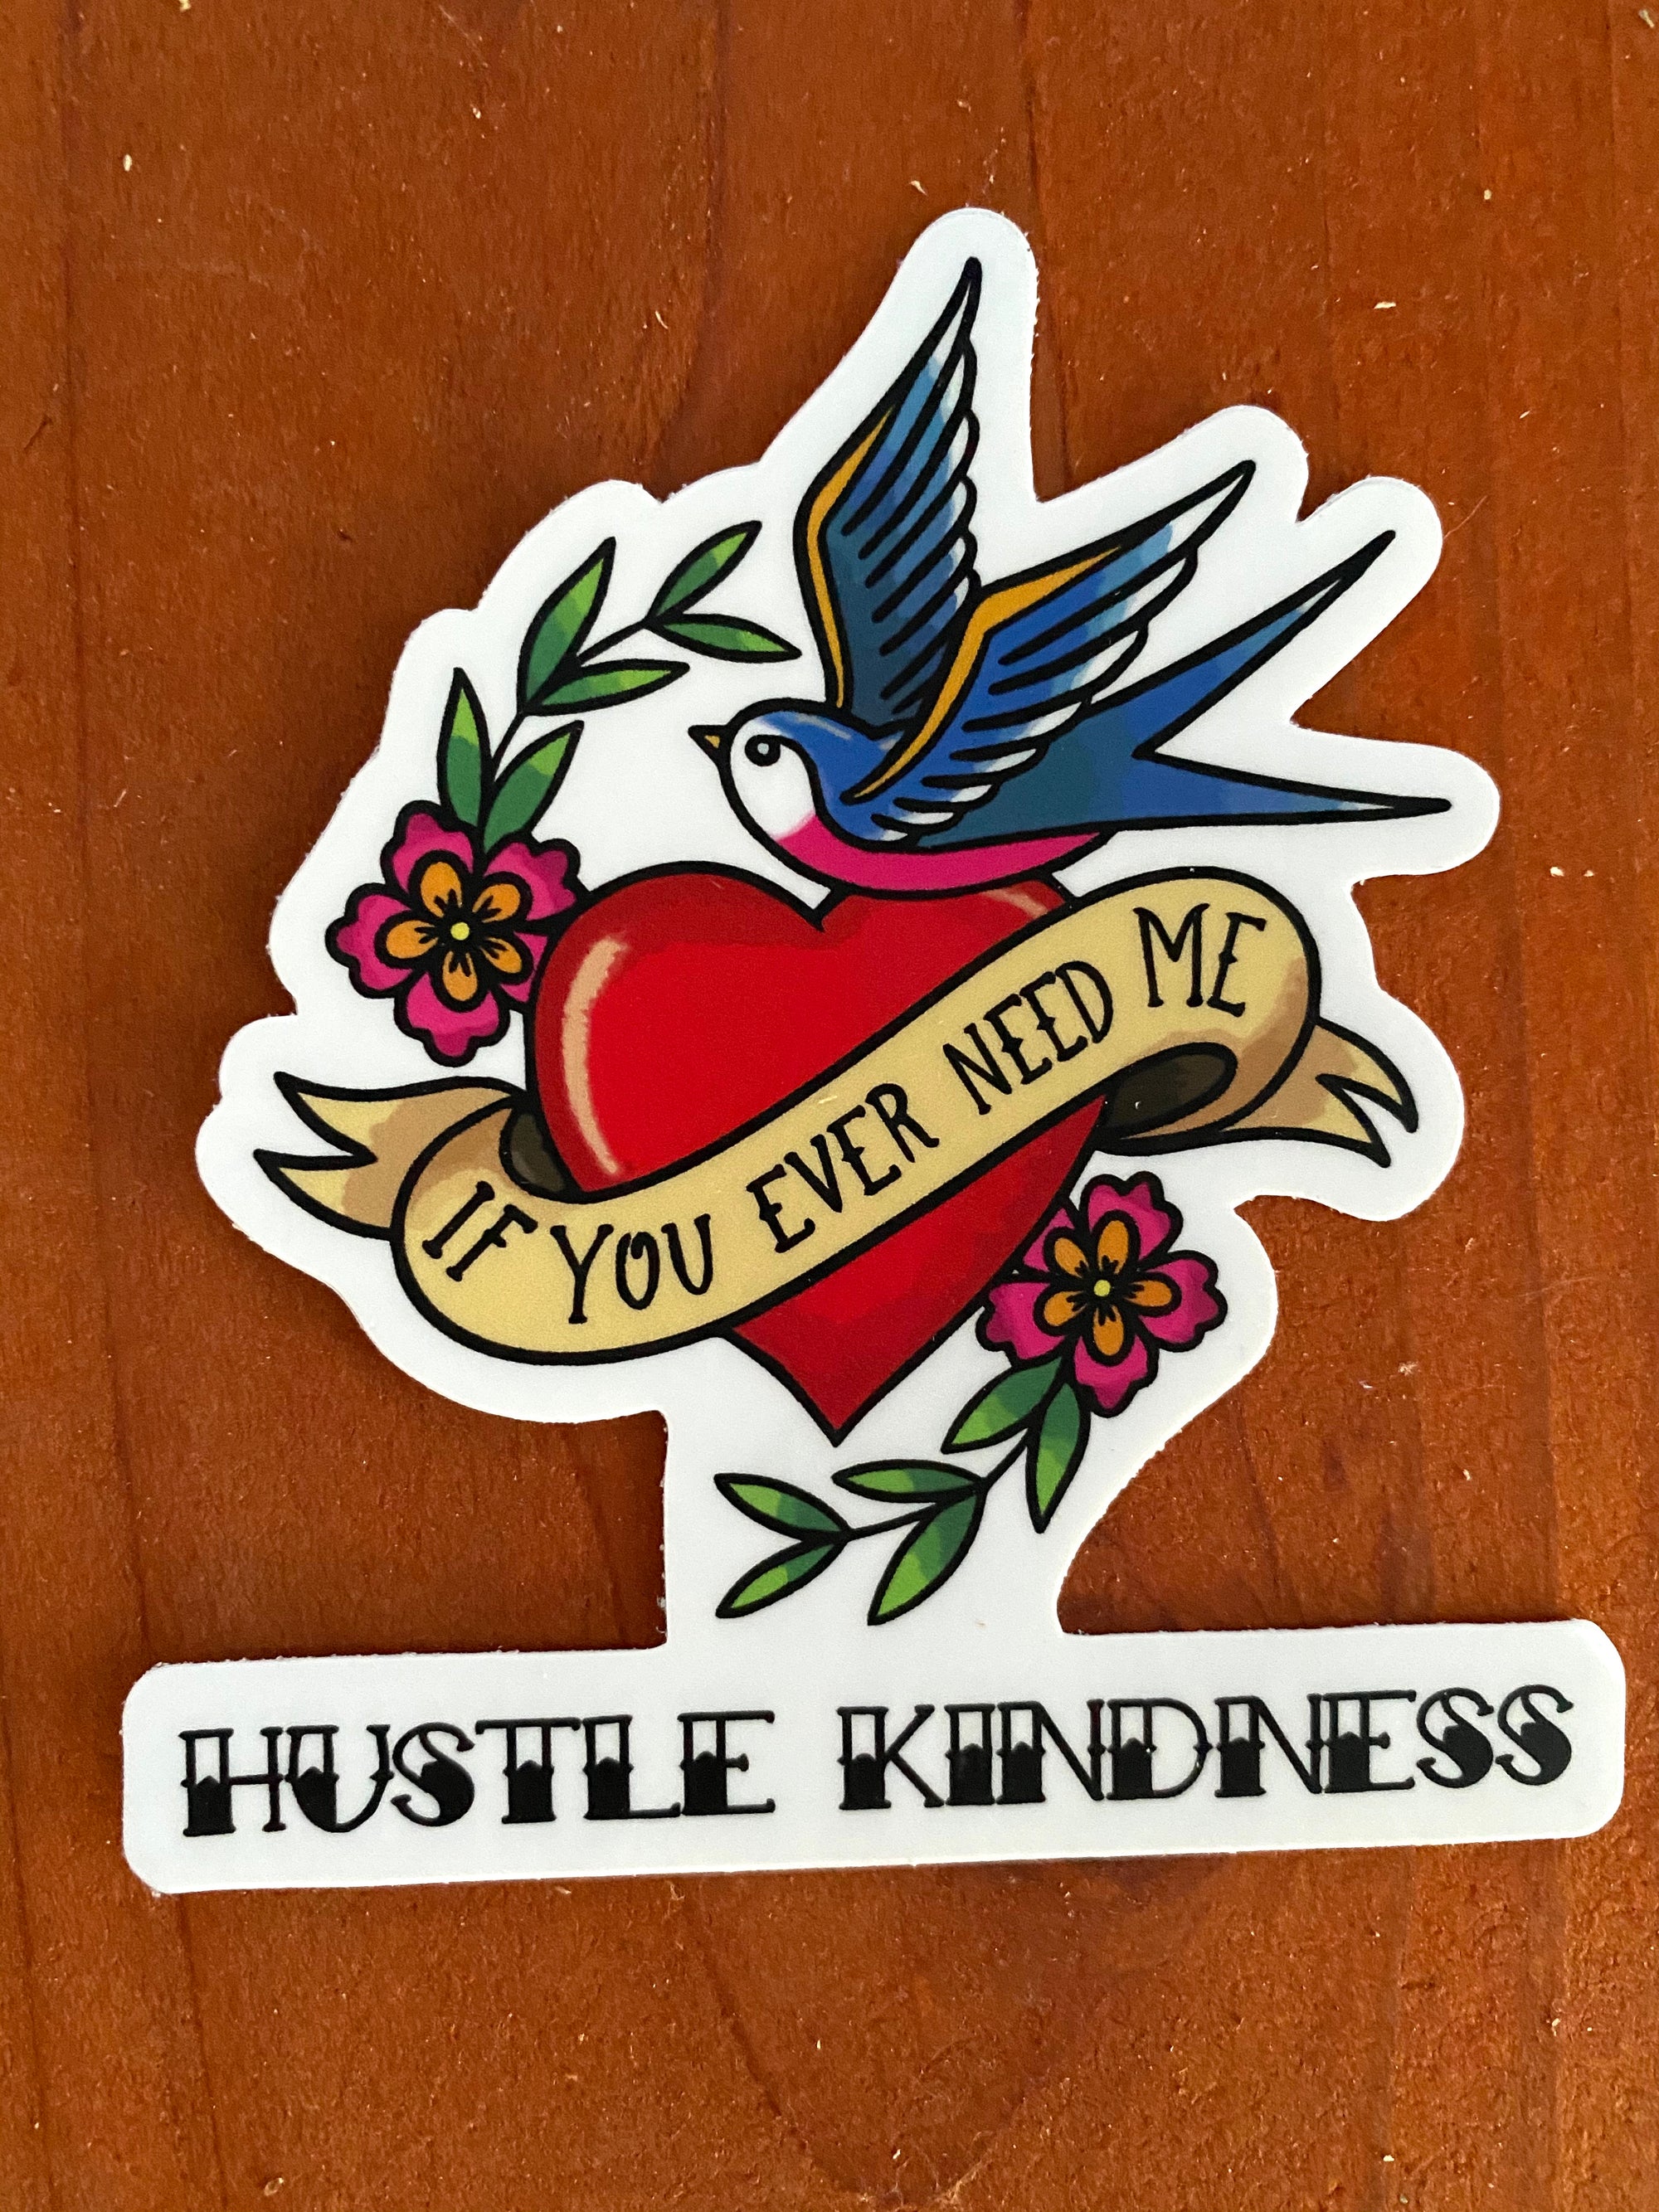 If You Ever Need Me Hustle Kindness Sticker